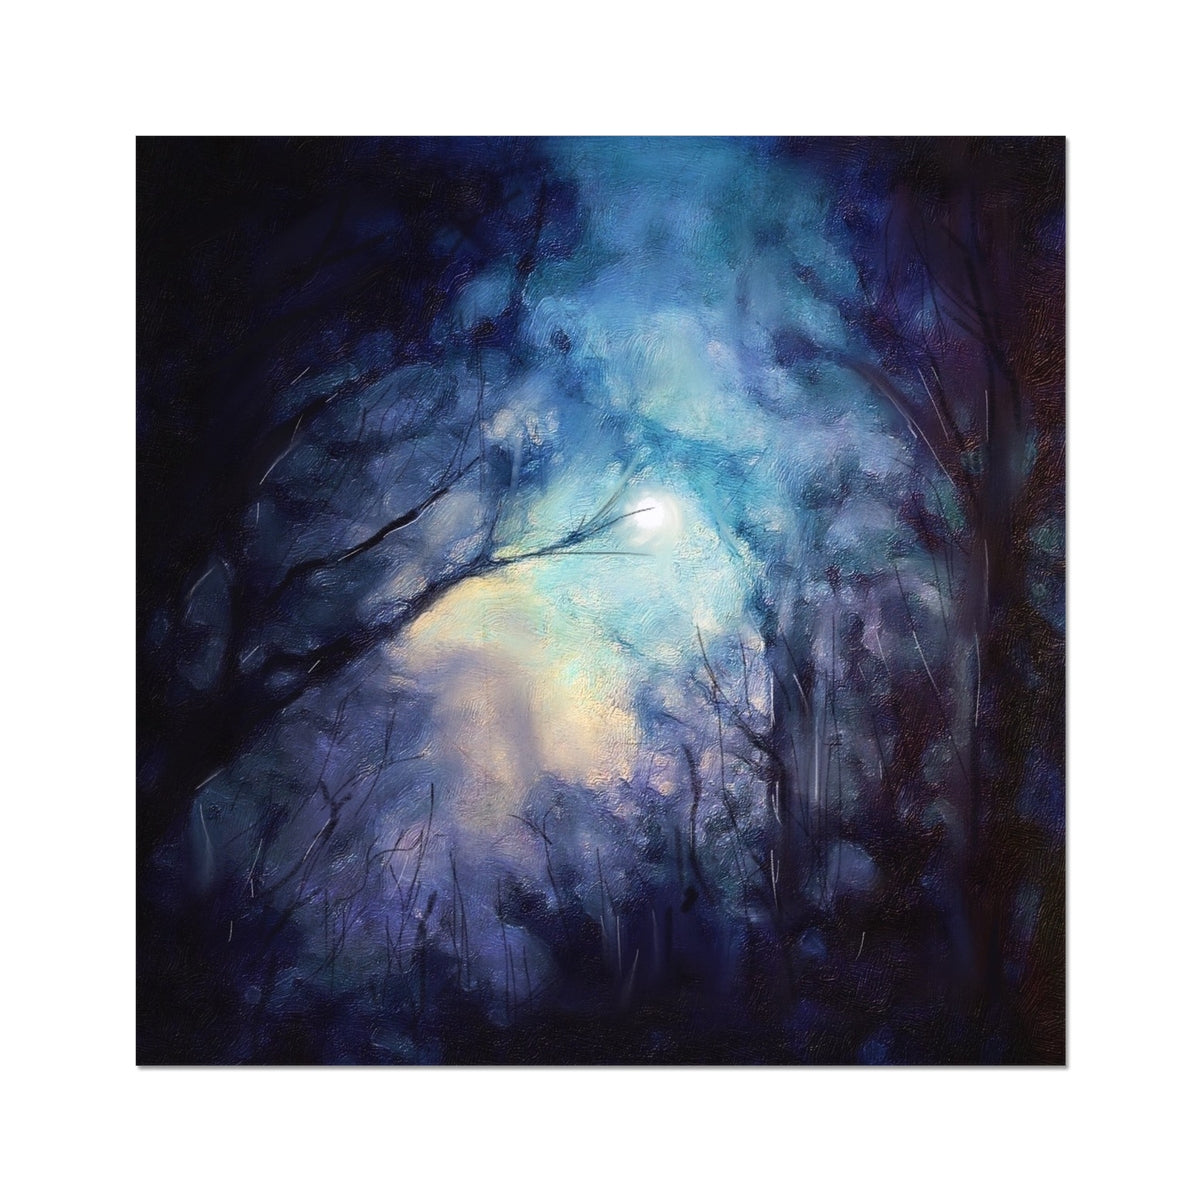 A Moonlit Highland Wood Painting | Artist Proof Collector Prints From Scotland-Artist Proof Collector Prints-Scottish Highlands & Lowlands Art Gallery-20"x20"-Paintings, Prints, Homeware, Art Gifts From Scotland By Scottish Artist Kevin Hunter